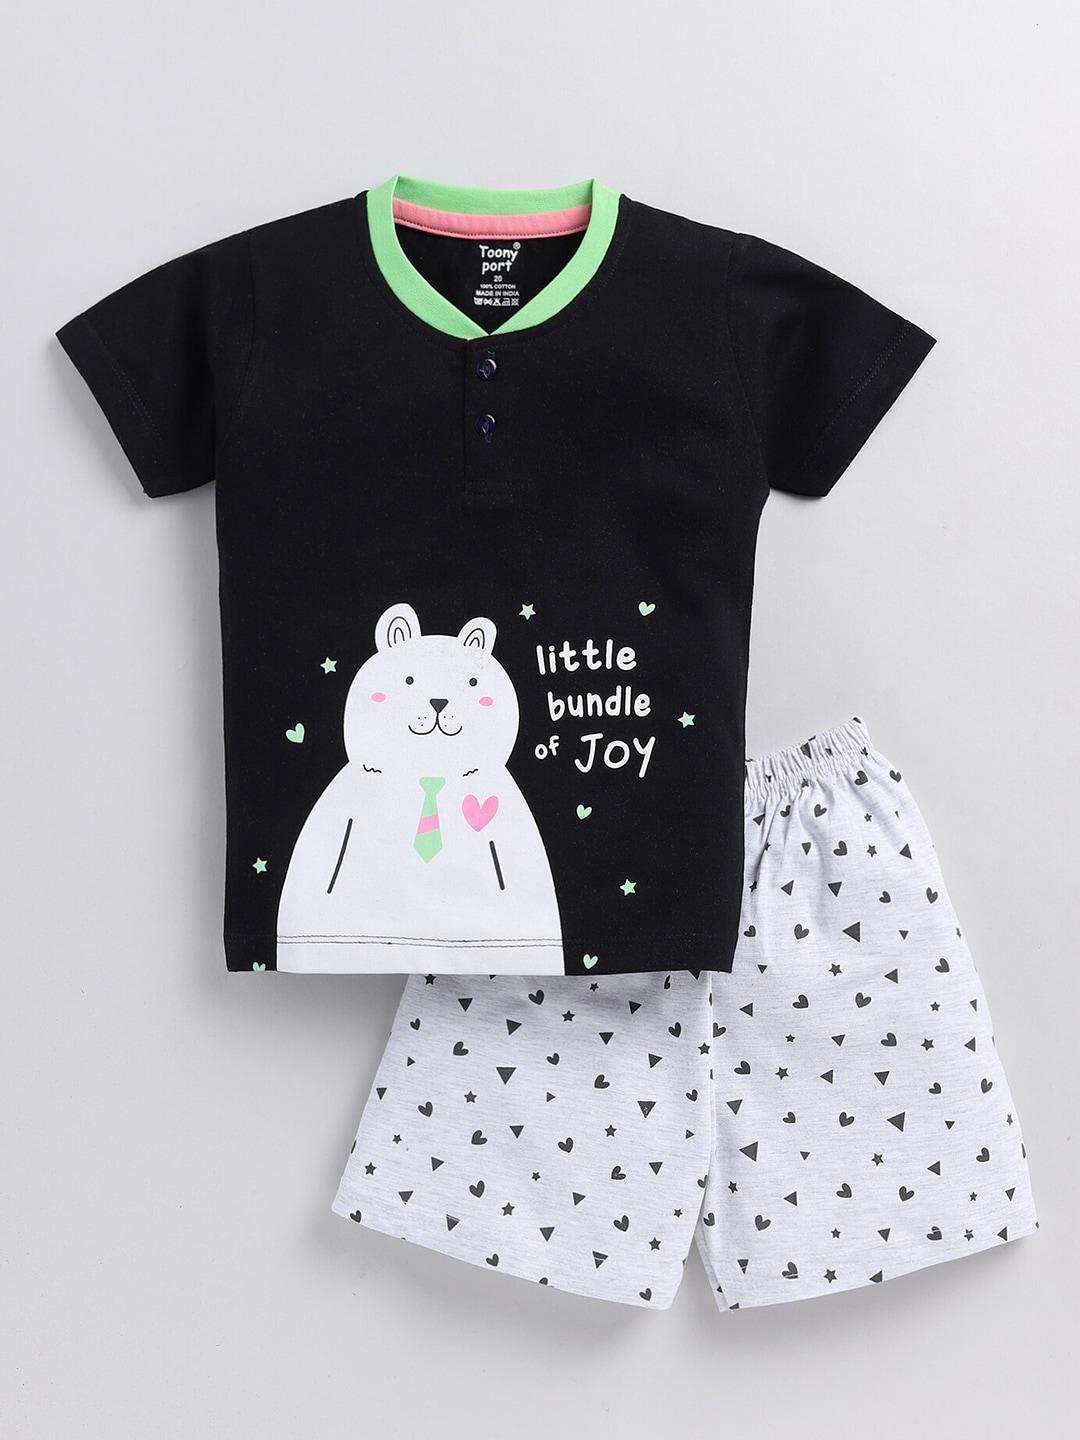 Toonyport Boys Printed Pure Cotton T-shirt with Shorts Clothing Set